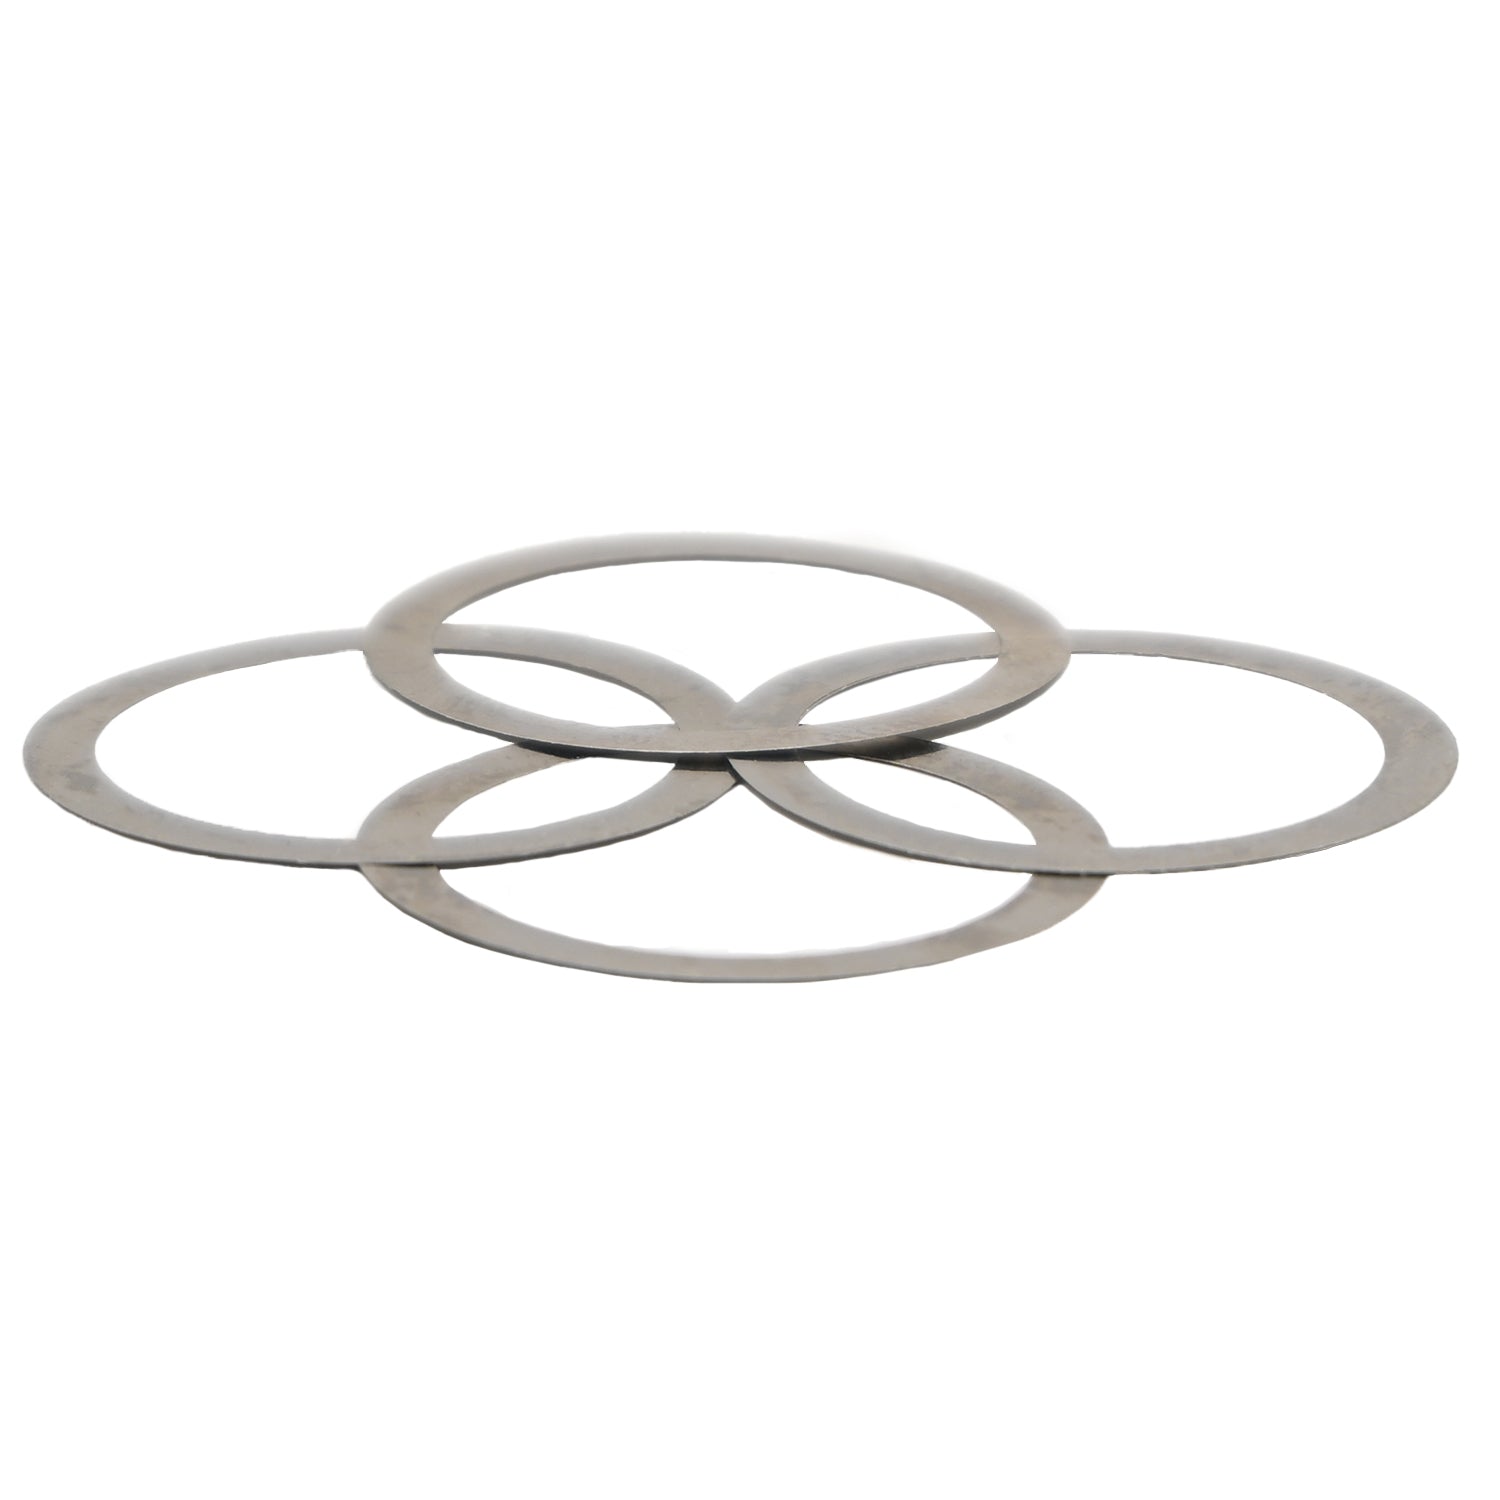 Four flat circular stainless steel shims stacked on one another on a white background. 